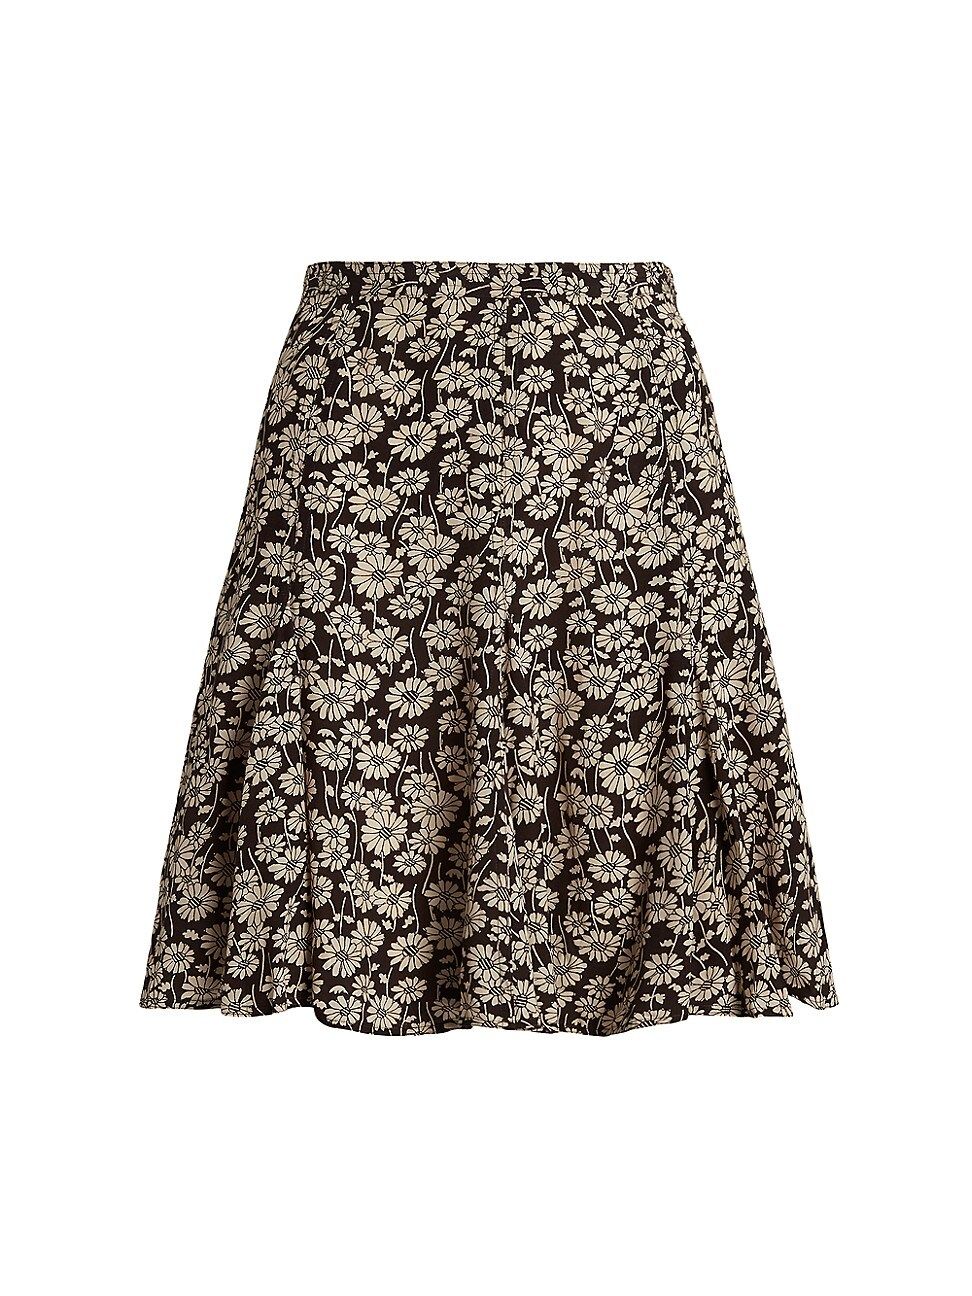 Women's Micky Floral Miniskirt - Spring Daisy Floral - Size 2 | Saks Fifth Avenue